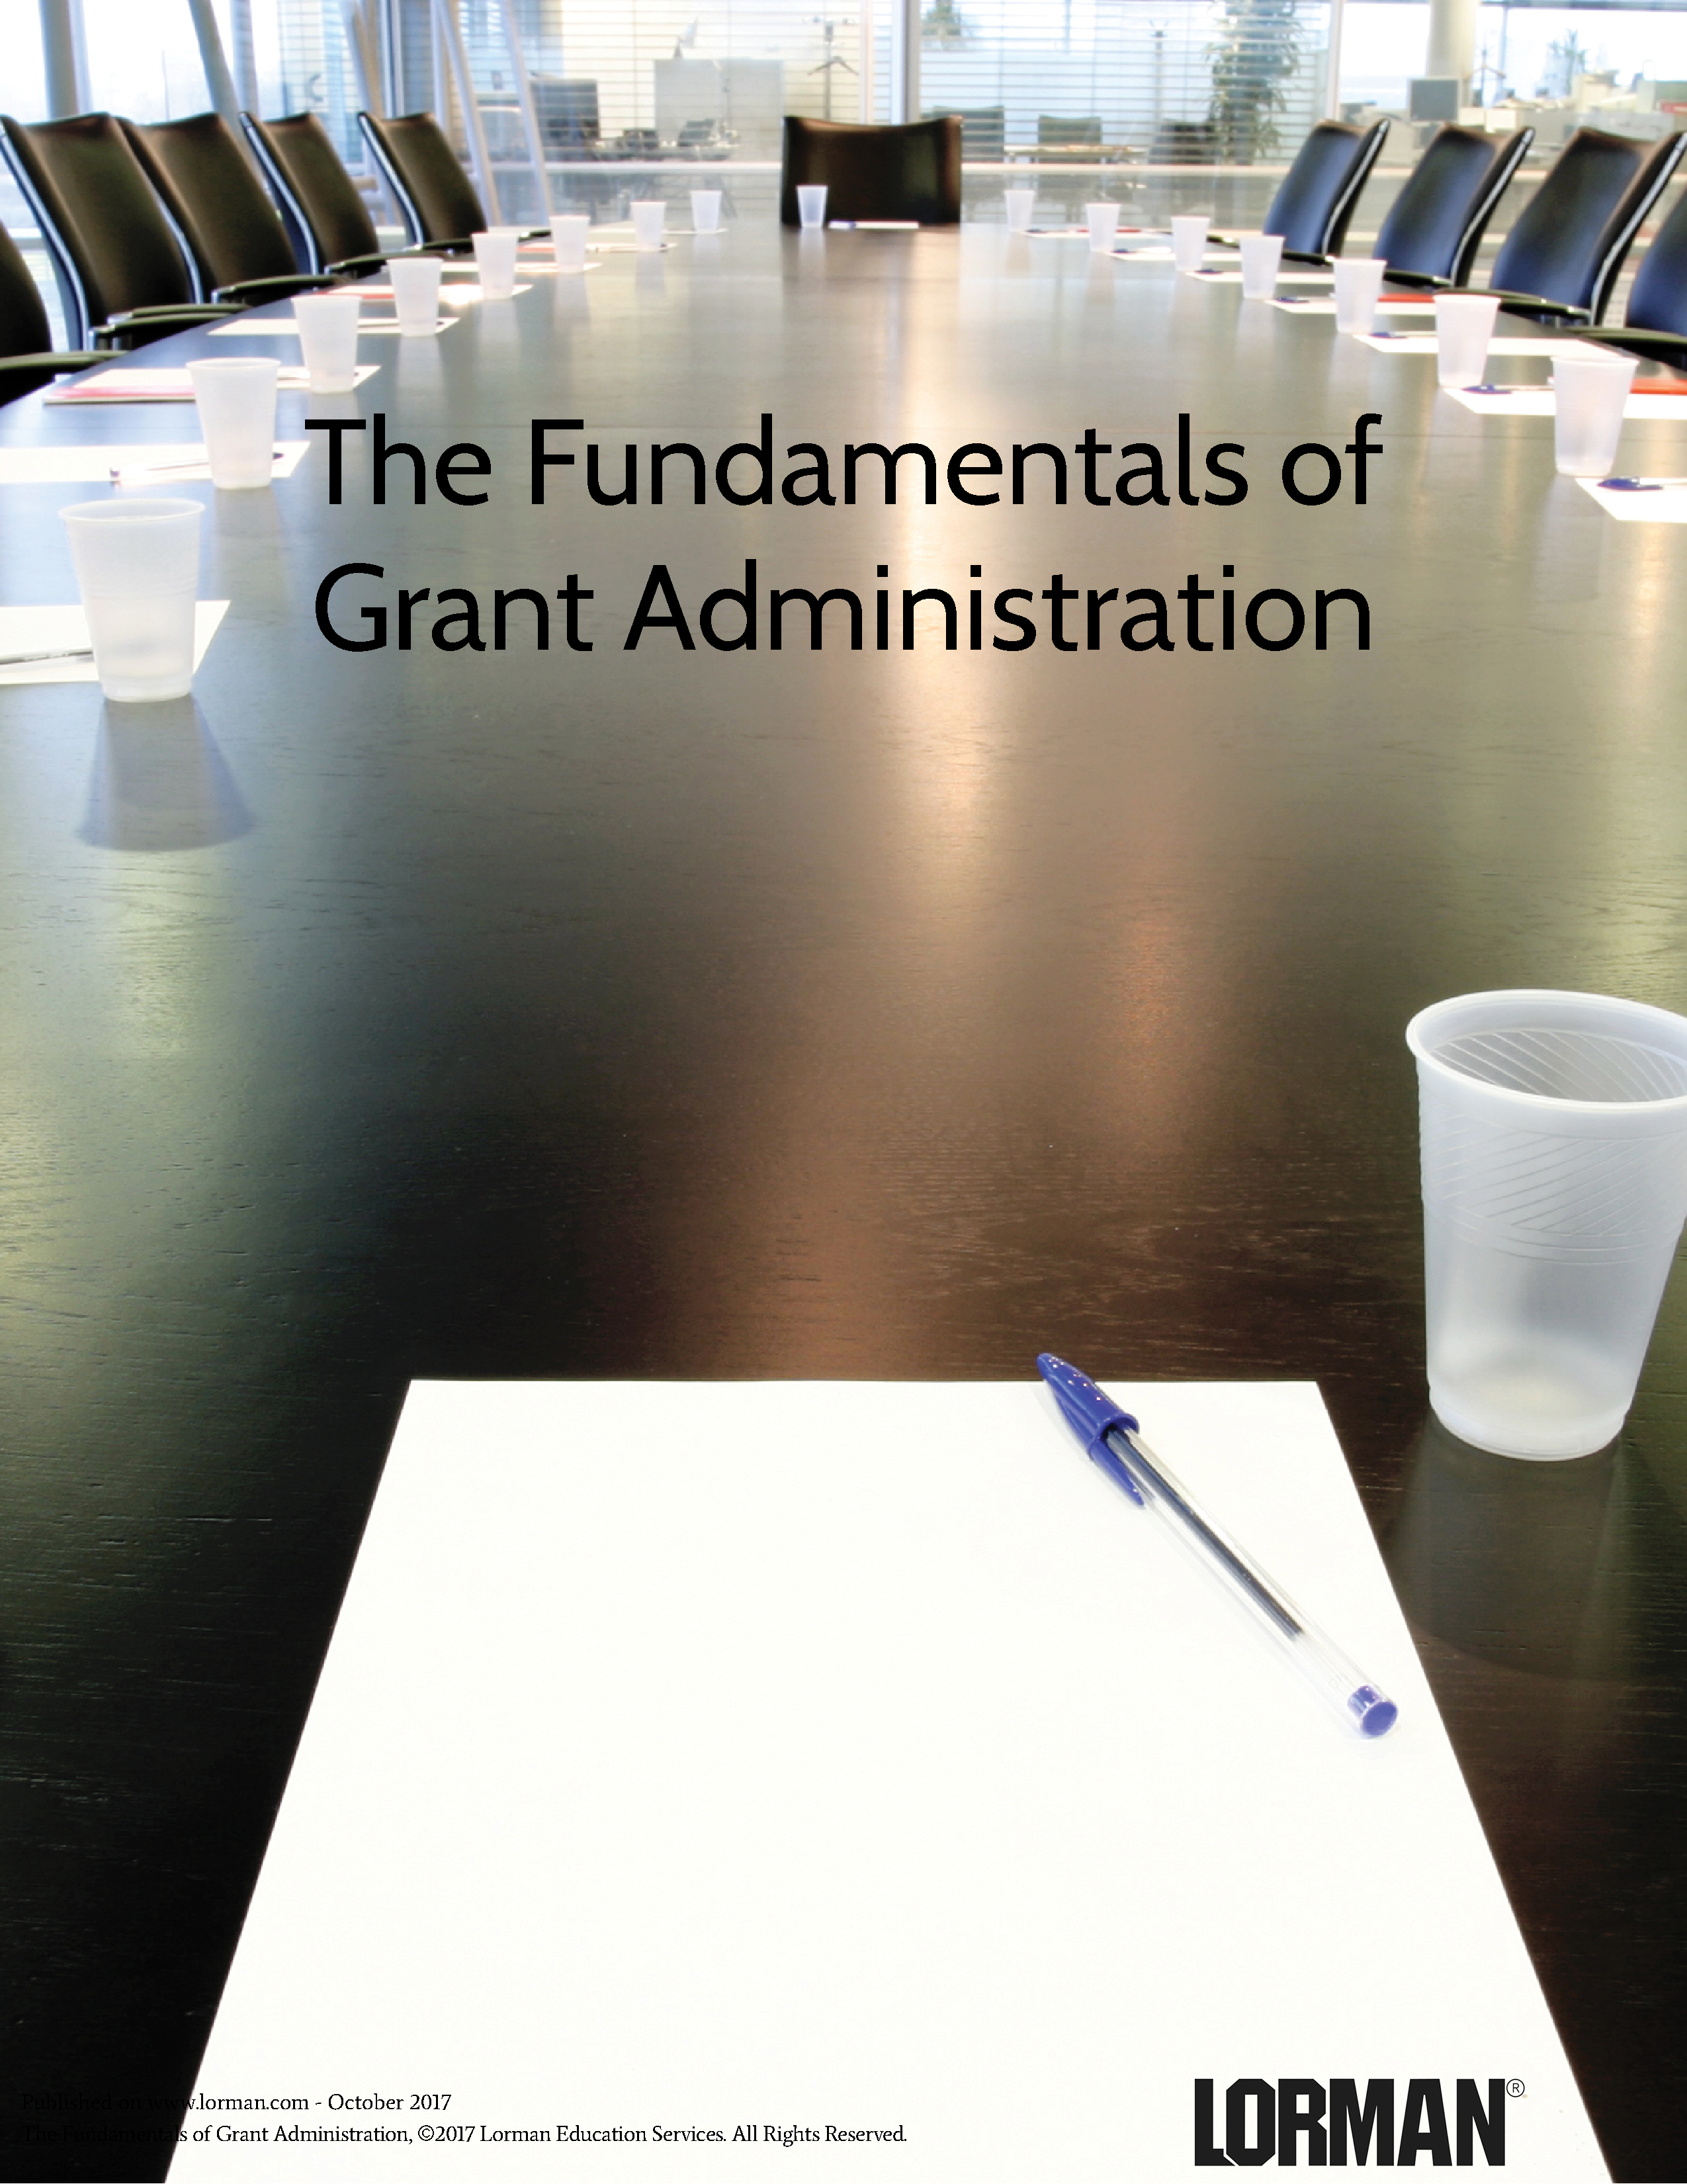 The Fundamentals of Grant Administration